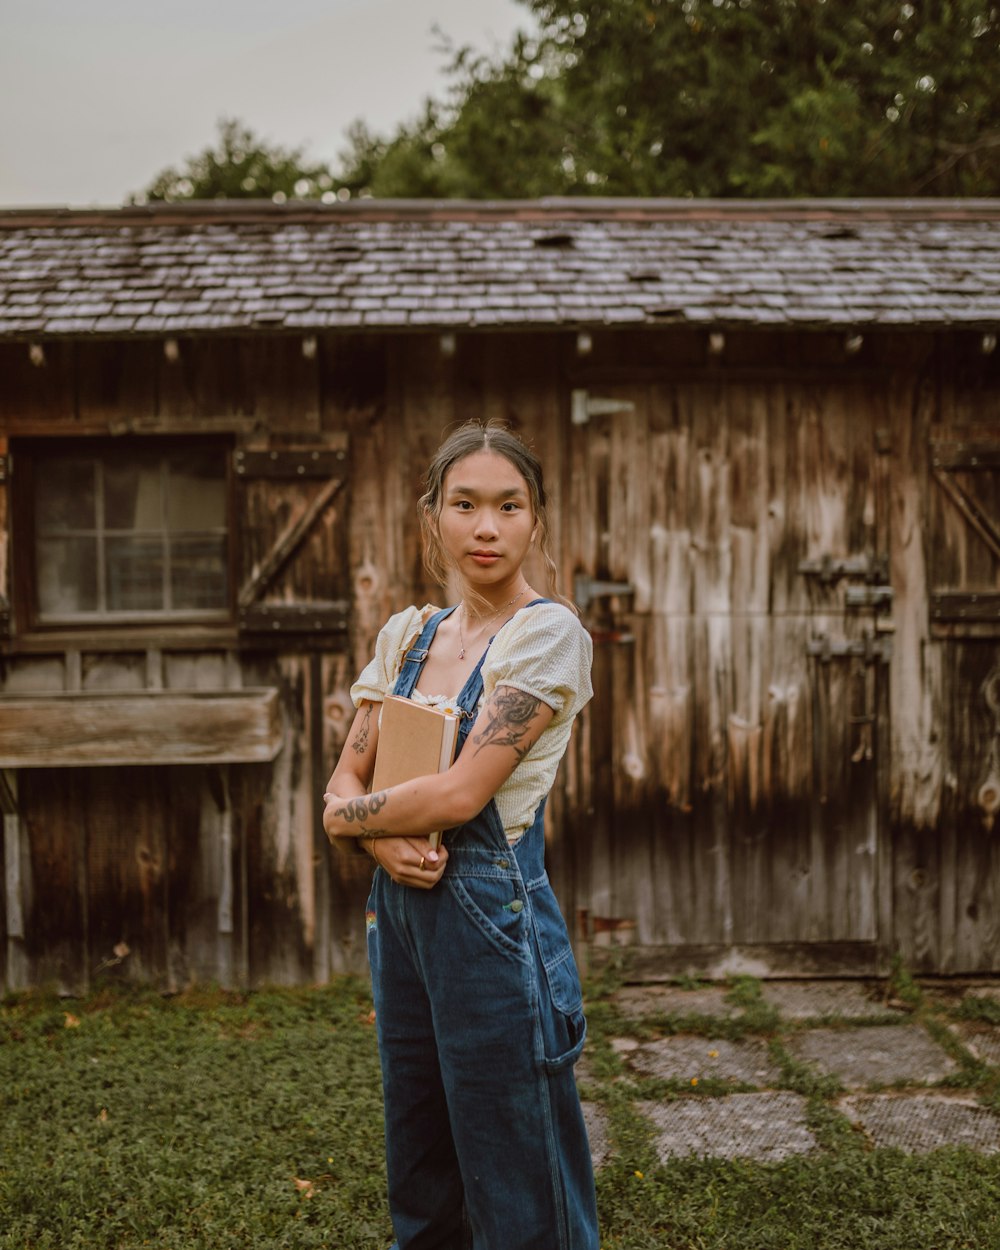 woman in blue denim jeans standing near brown wooden house during daytime  photo – Free Pants Image on Unsplash